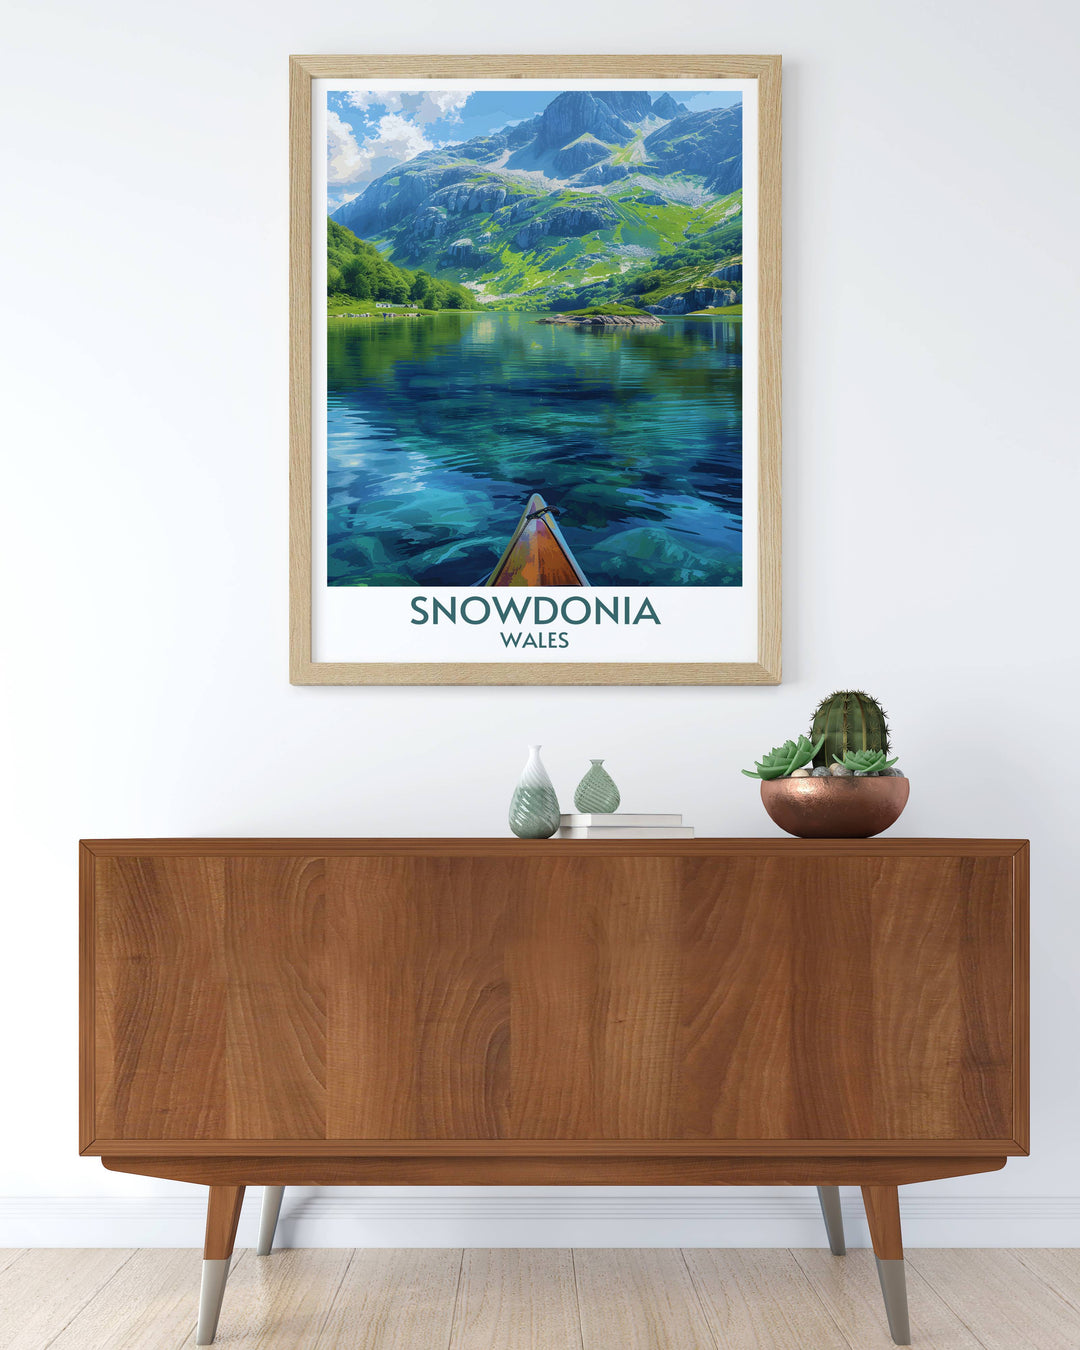 Transform your home decor with our custom prints of Snowdonias Llyn Padarn. Tailor the vibrant scenes to suit your style and space, bringing the timeless appeal of Wales natural beauty into your living room.